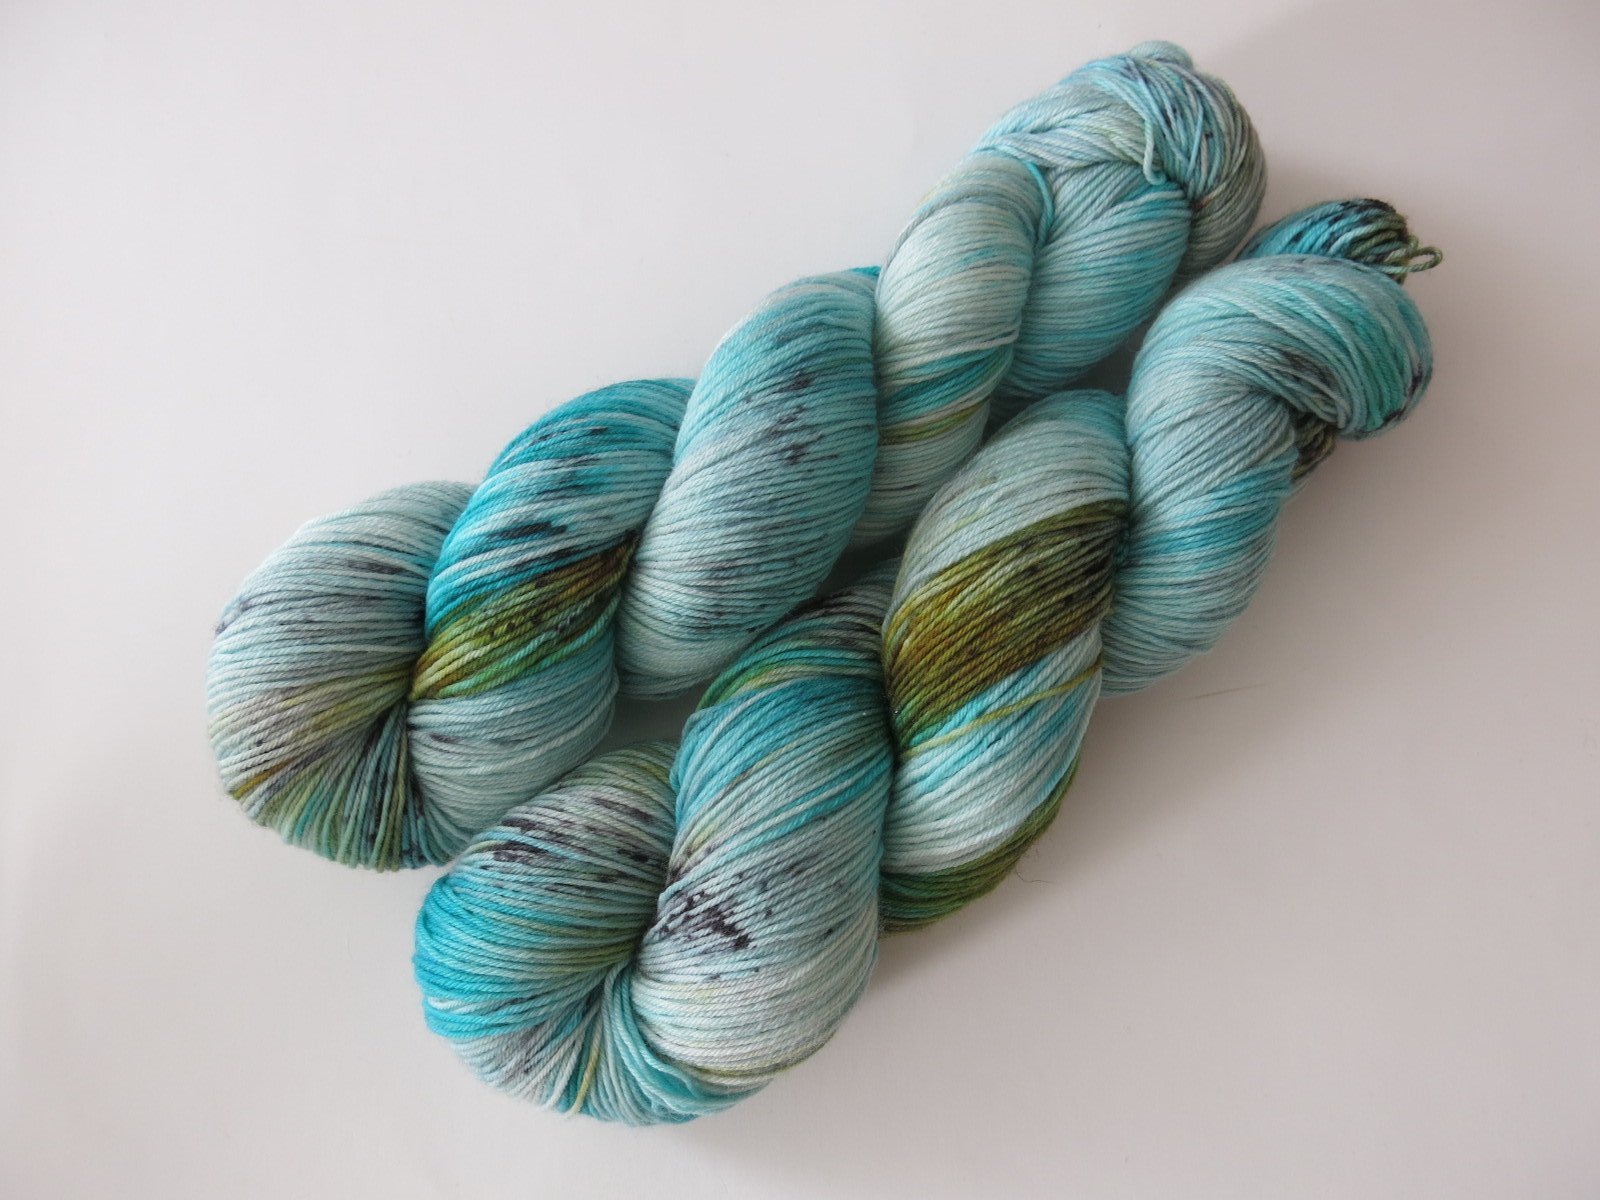 indie dyed speckled turquoise blue sock yarn in 100g skeins